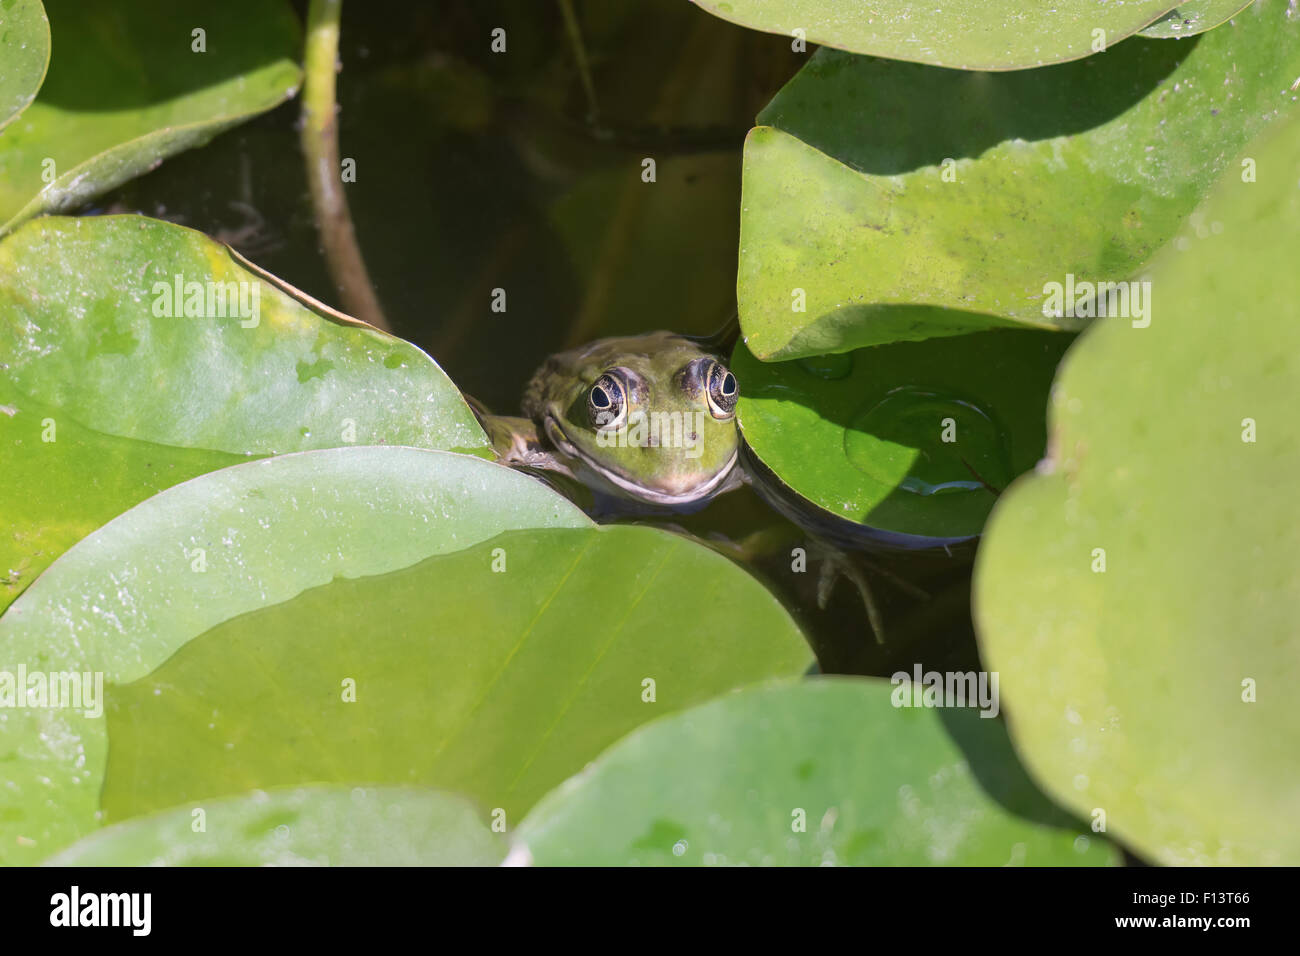 Frog head coming out of a swamp against the water lilies. Stock Photo